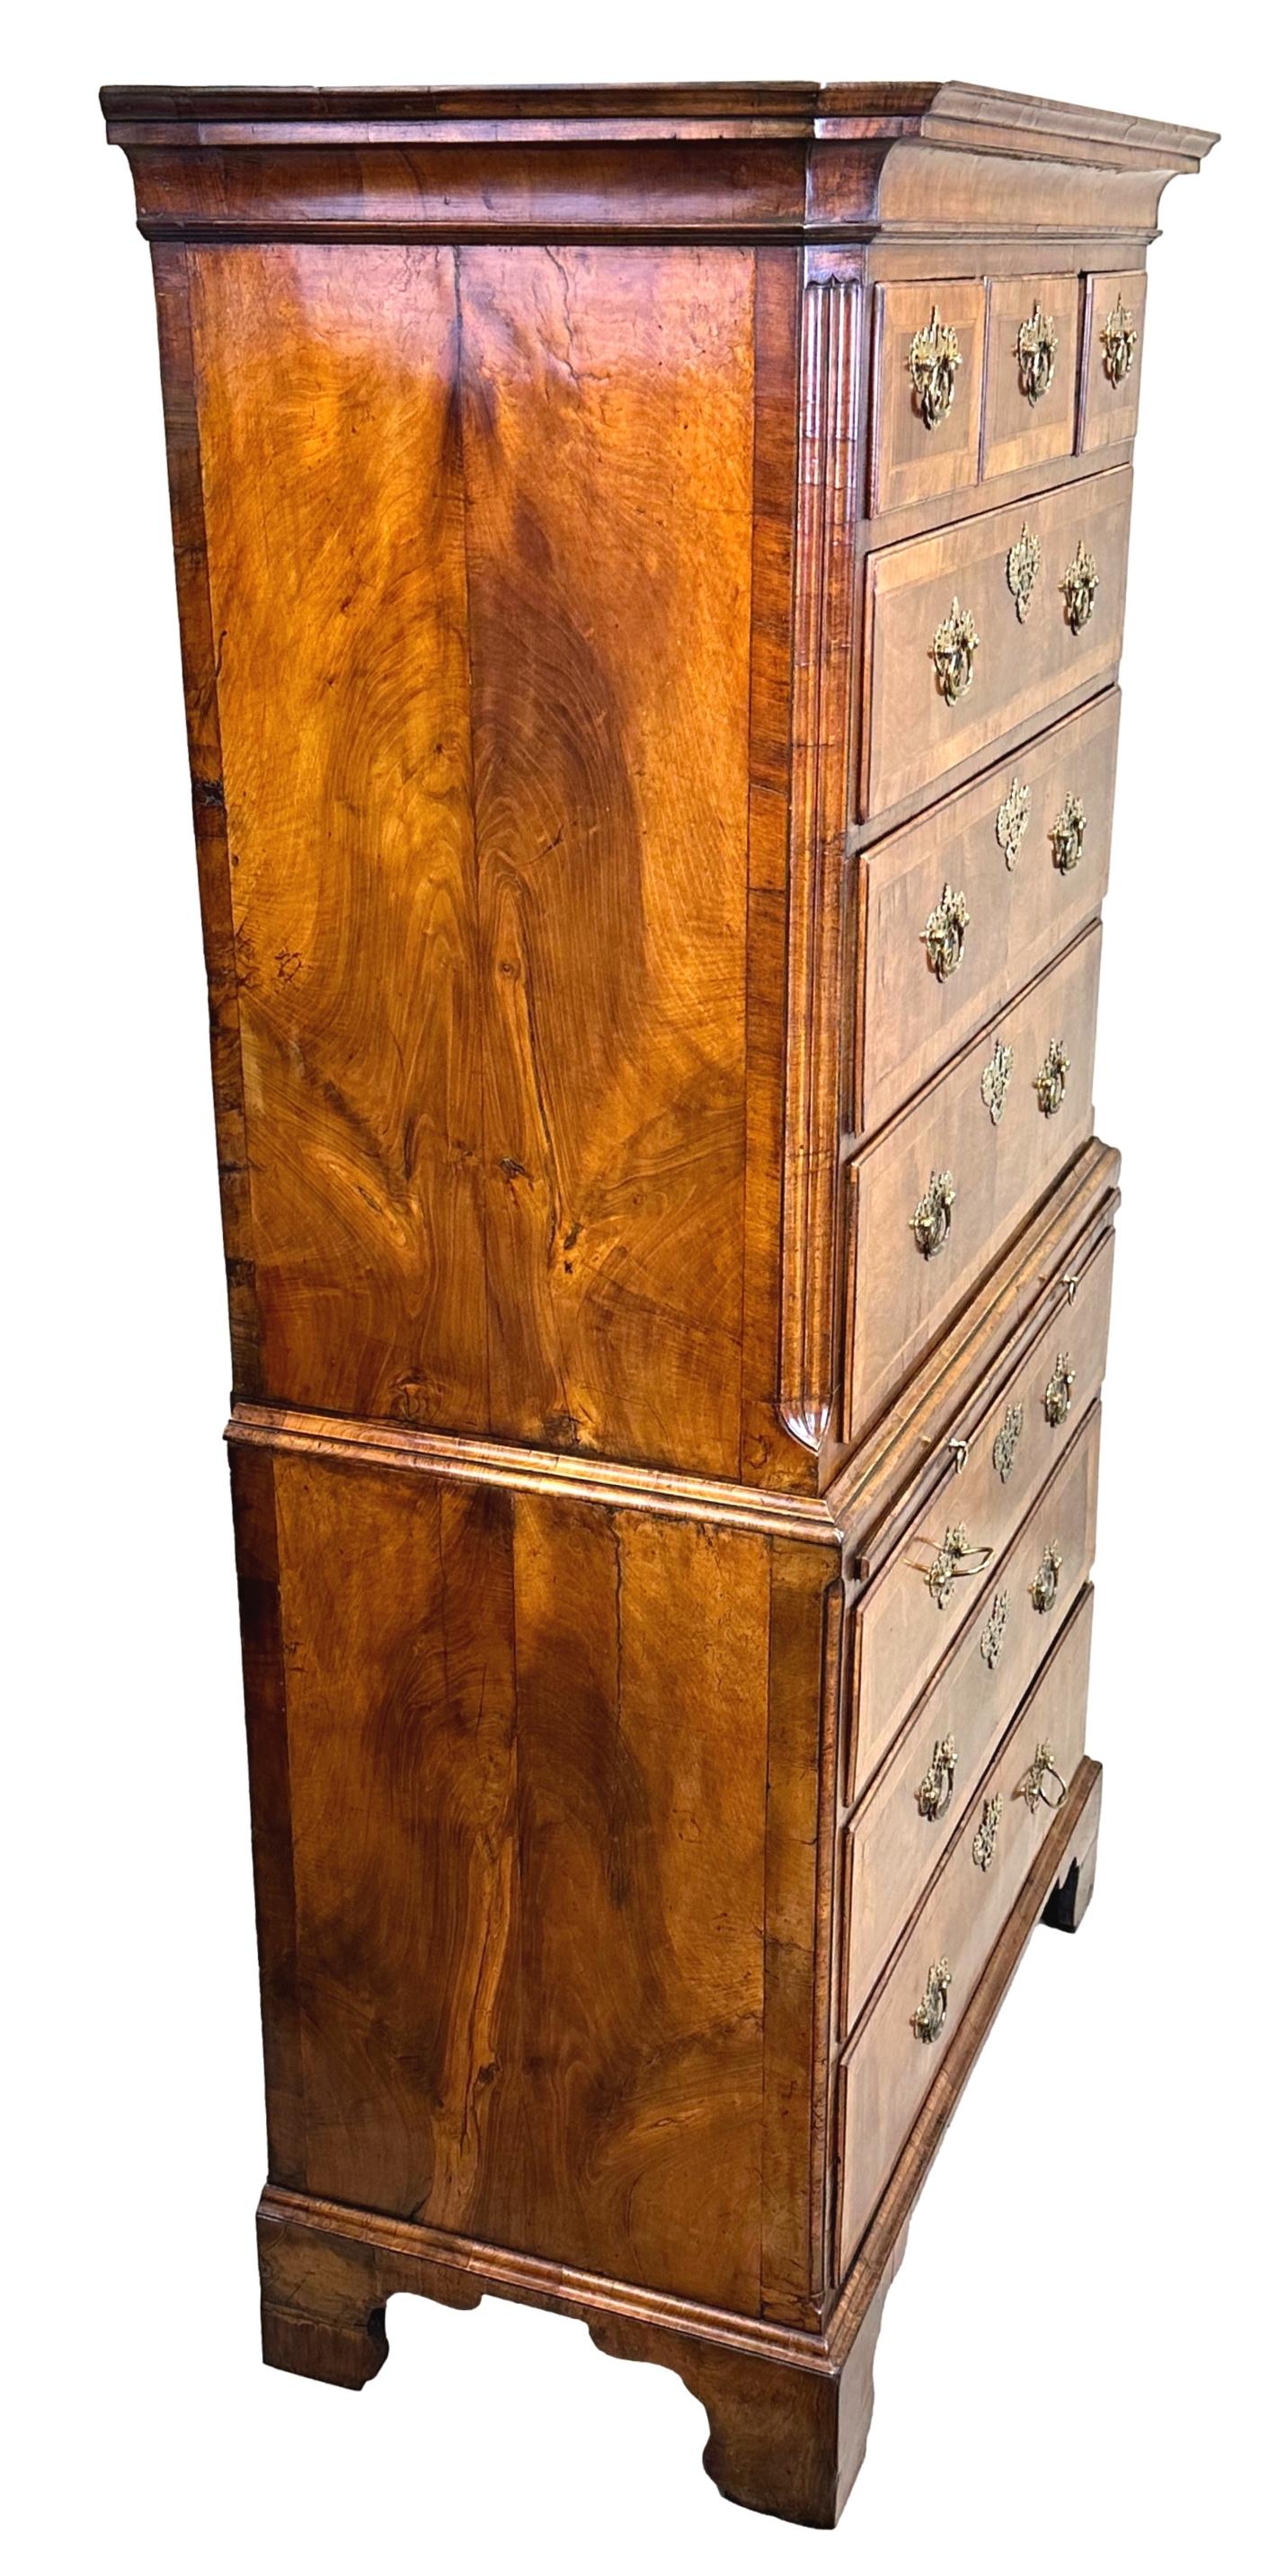 A Fine Quality Early 18th Century, George II Period, Figured Walnut Tallboy, Or Chest On Chest, Having Three Short Drawers Over Six Long Drawers And Panelled Slide, Retaining Original Fretted Brass Plate Handles And Escutcheons, Flanked By Elegant